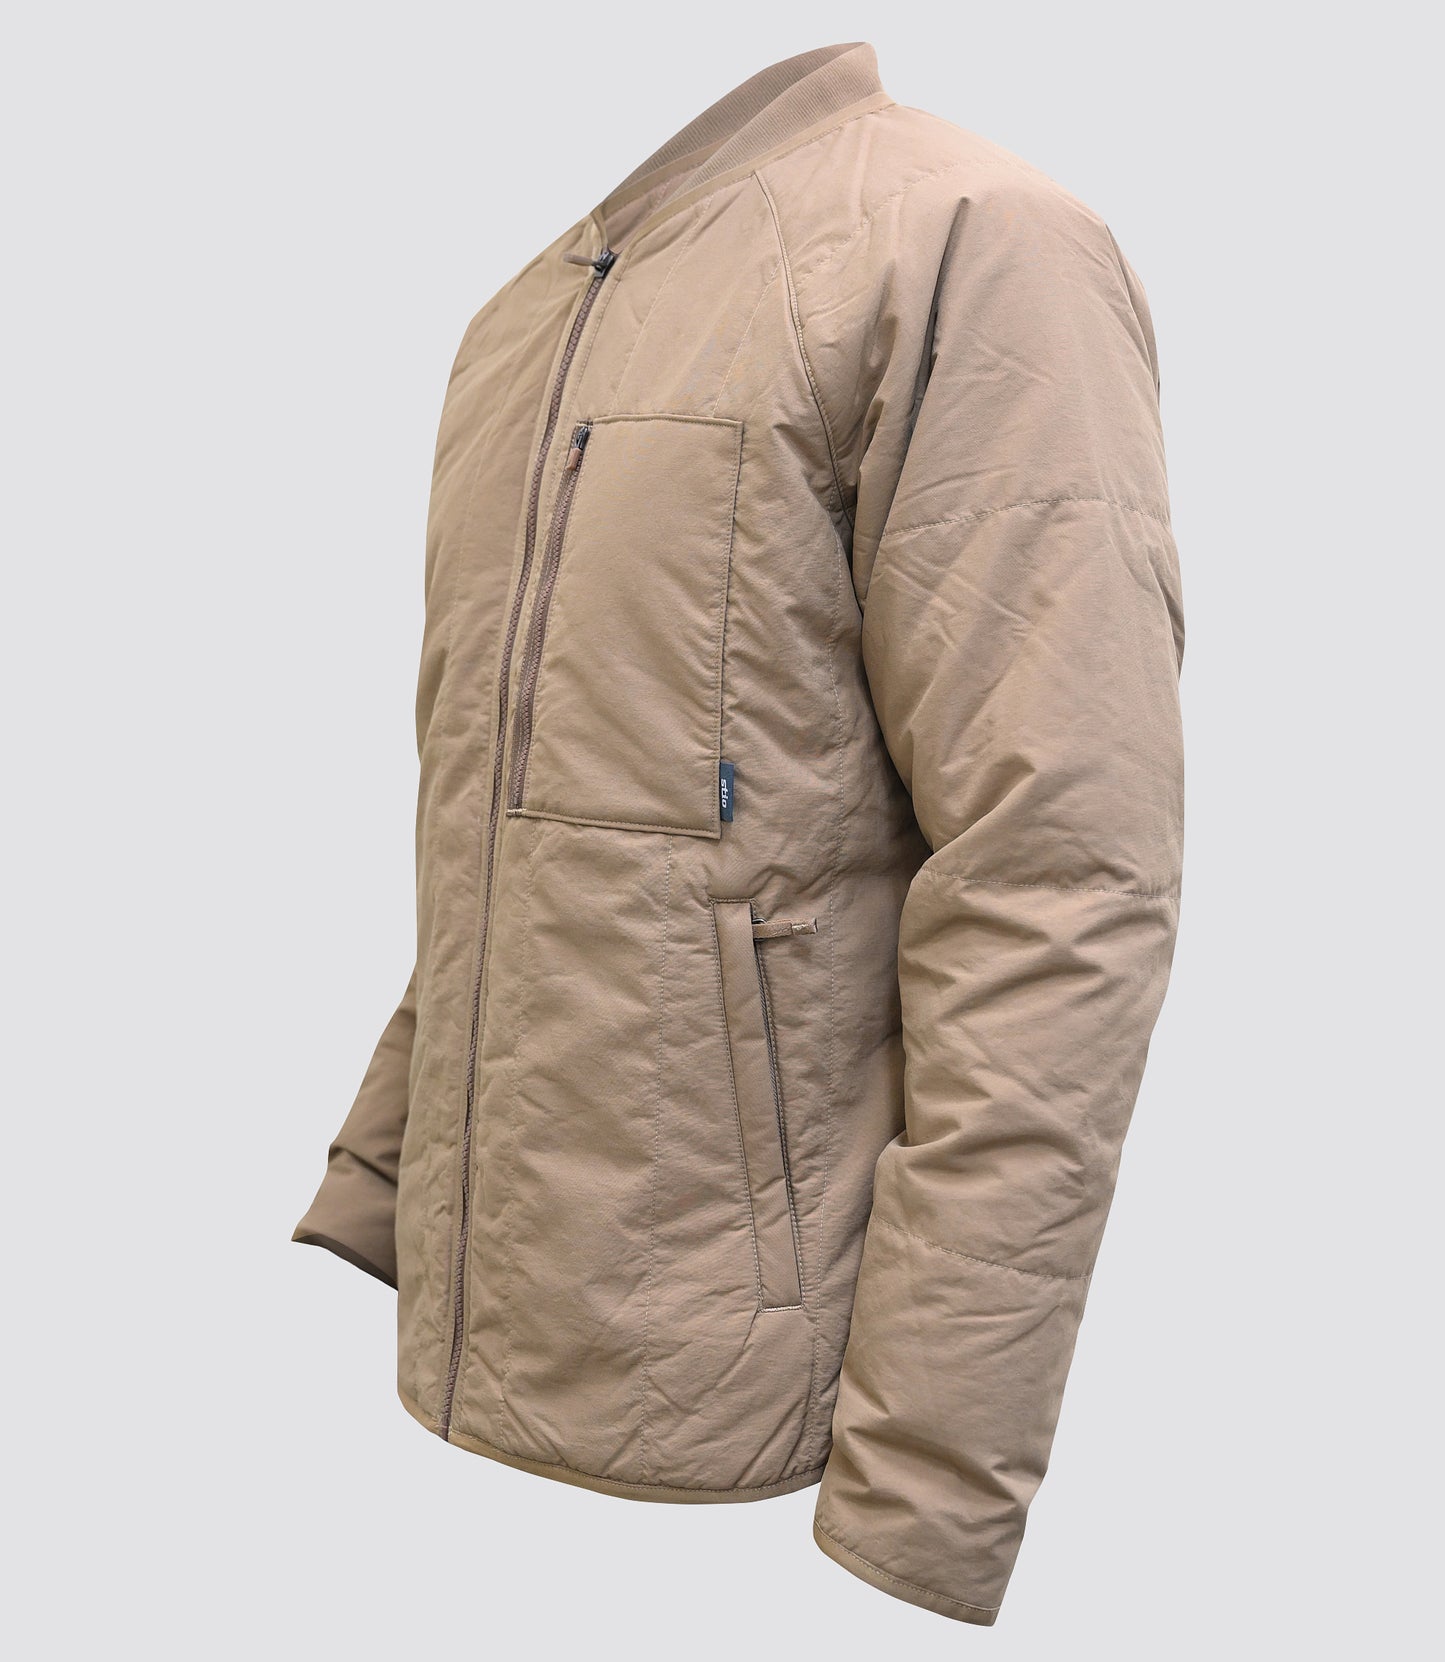 Stio Peak Mens West Butte Insulated Jacket